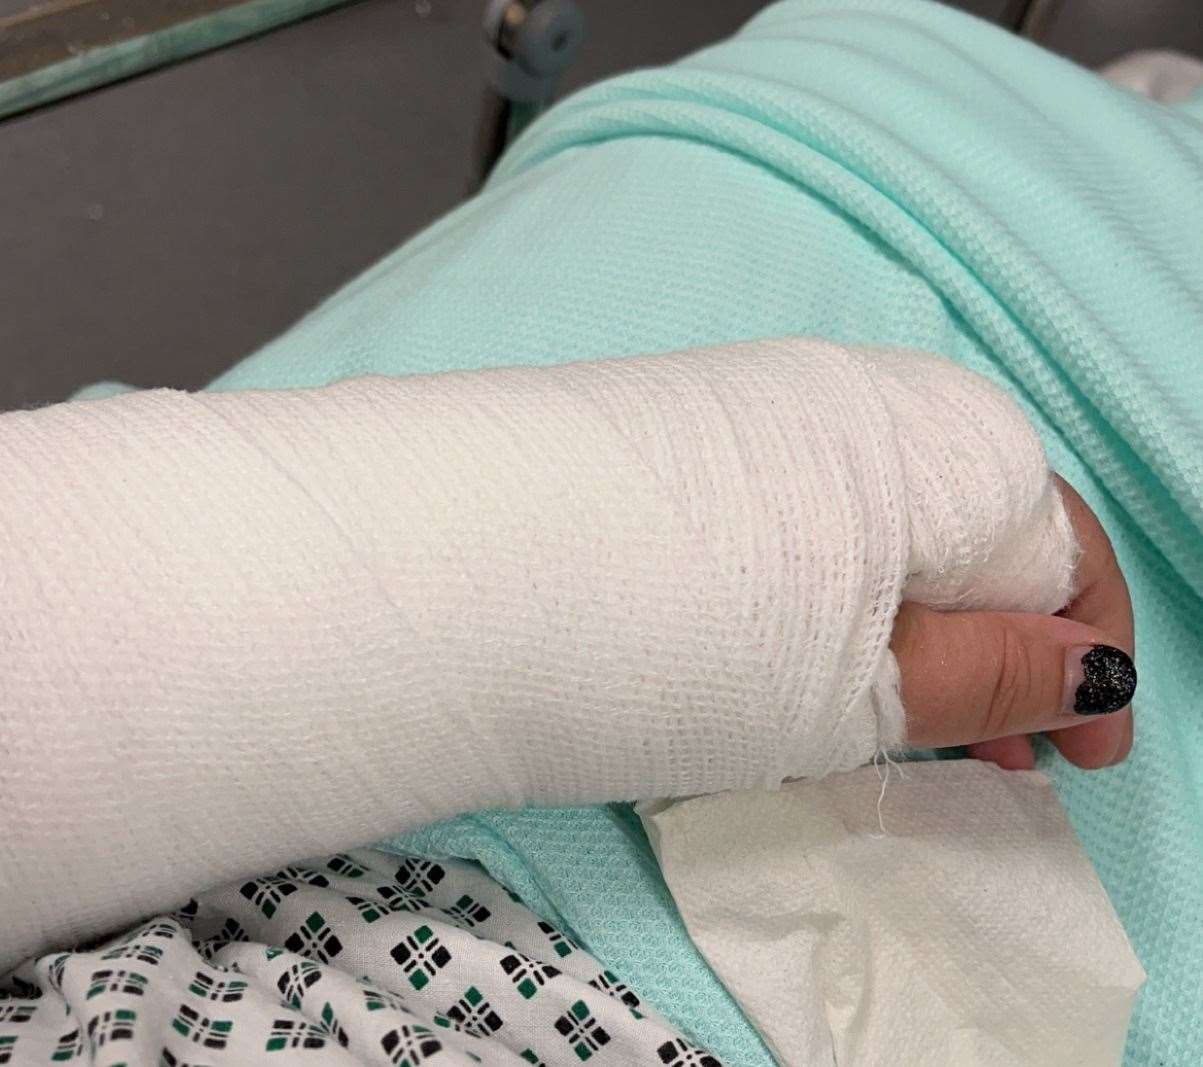 Sarah suffered a broken radius in her left arm from the fall